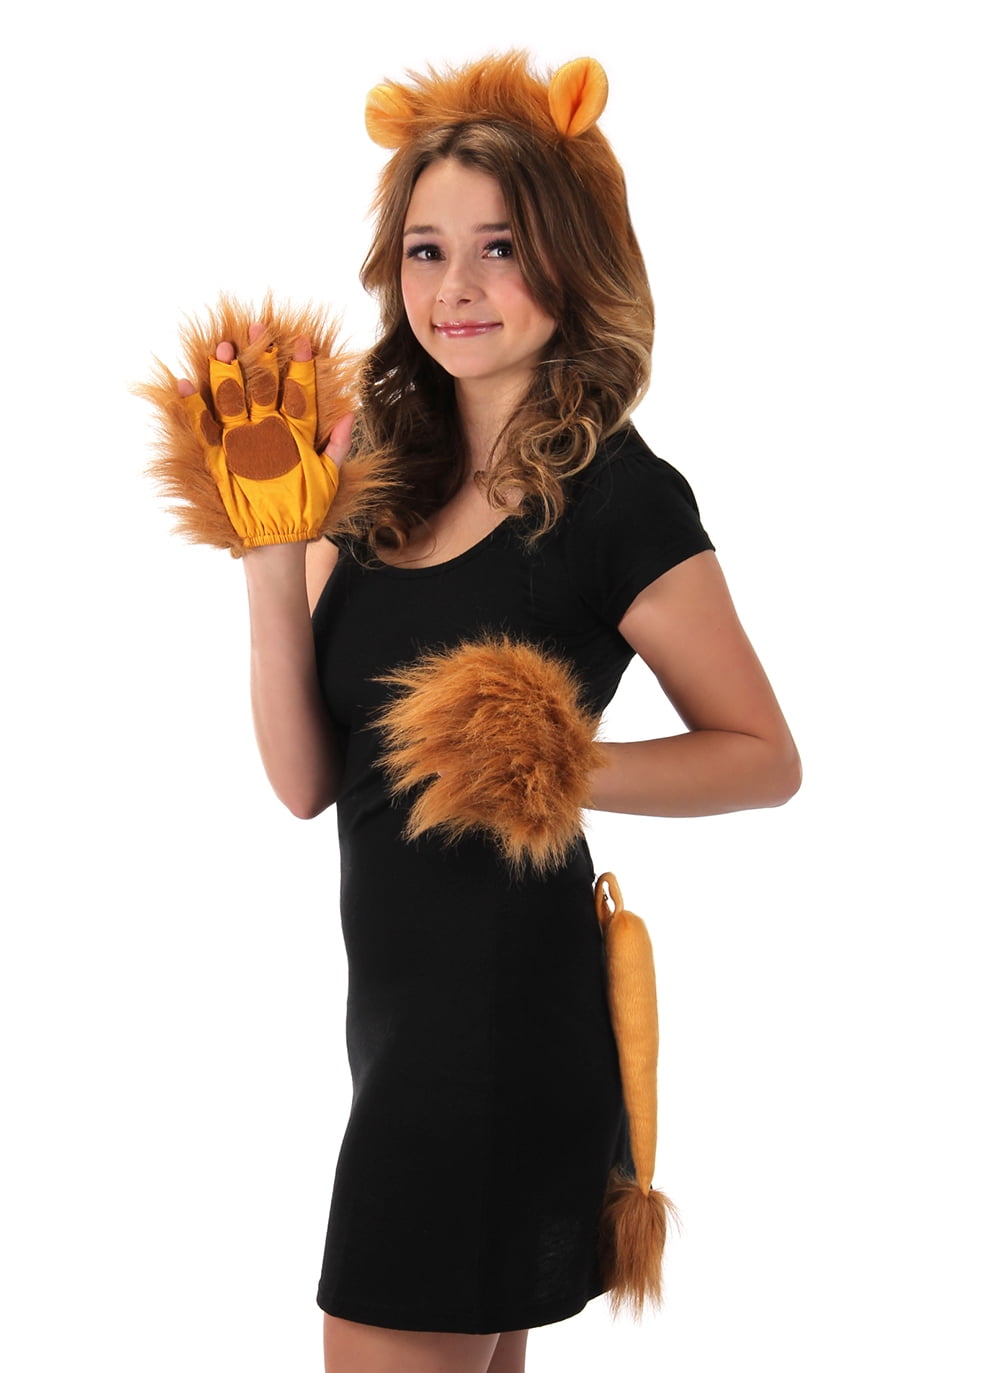 Lion Ears Plush Headband and Tail Costume Kit for kids and adults -  